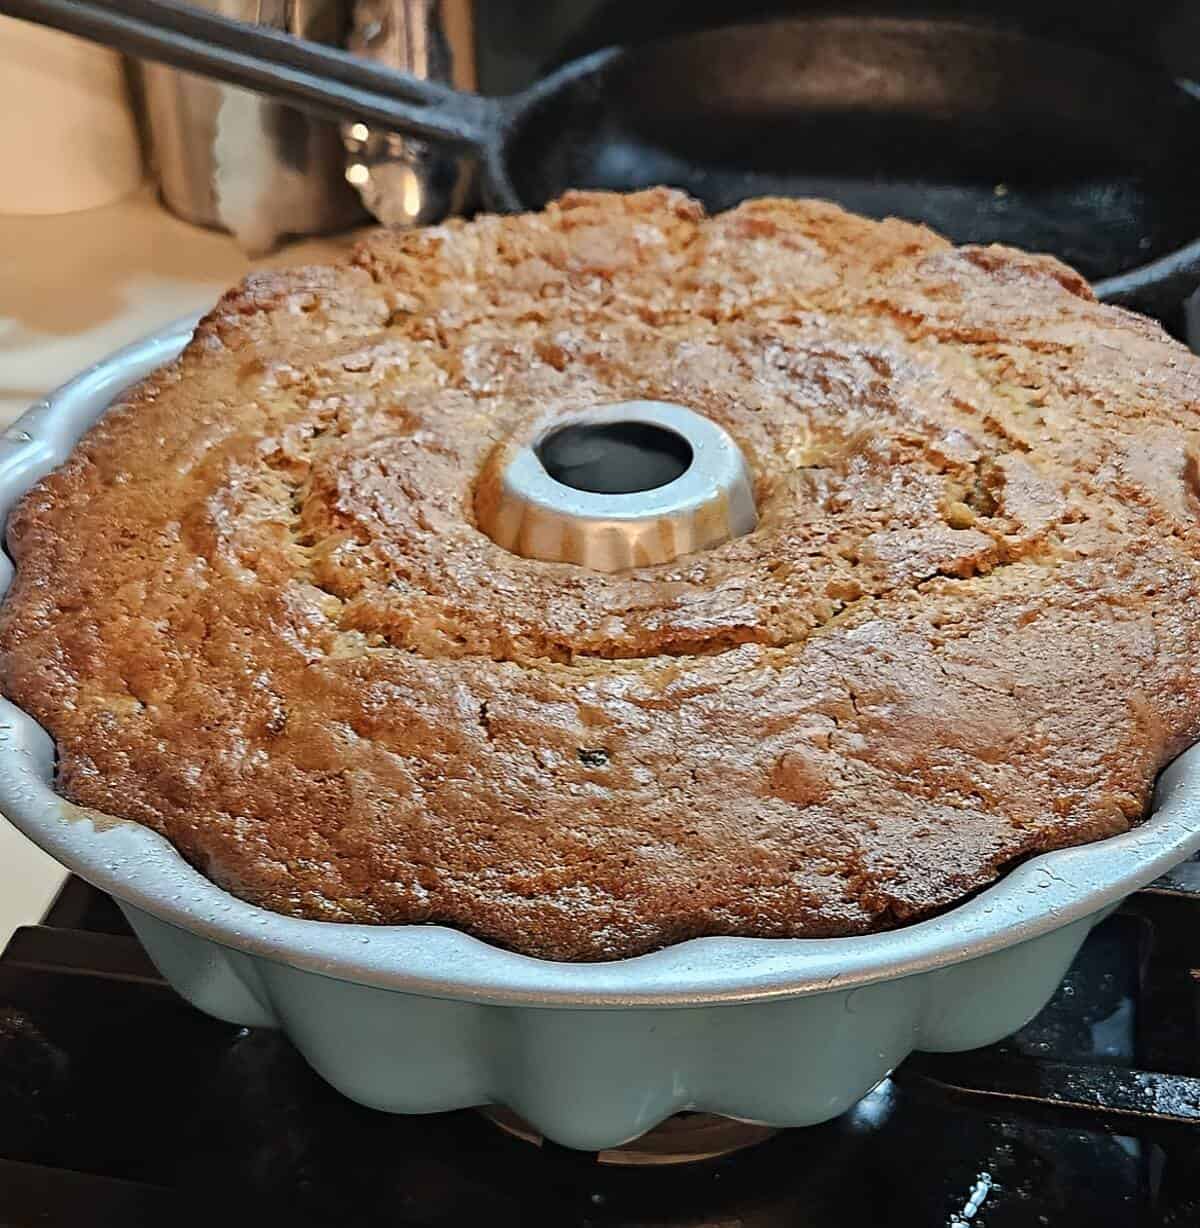 bundt pan with fully baked zucchini bread in it.